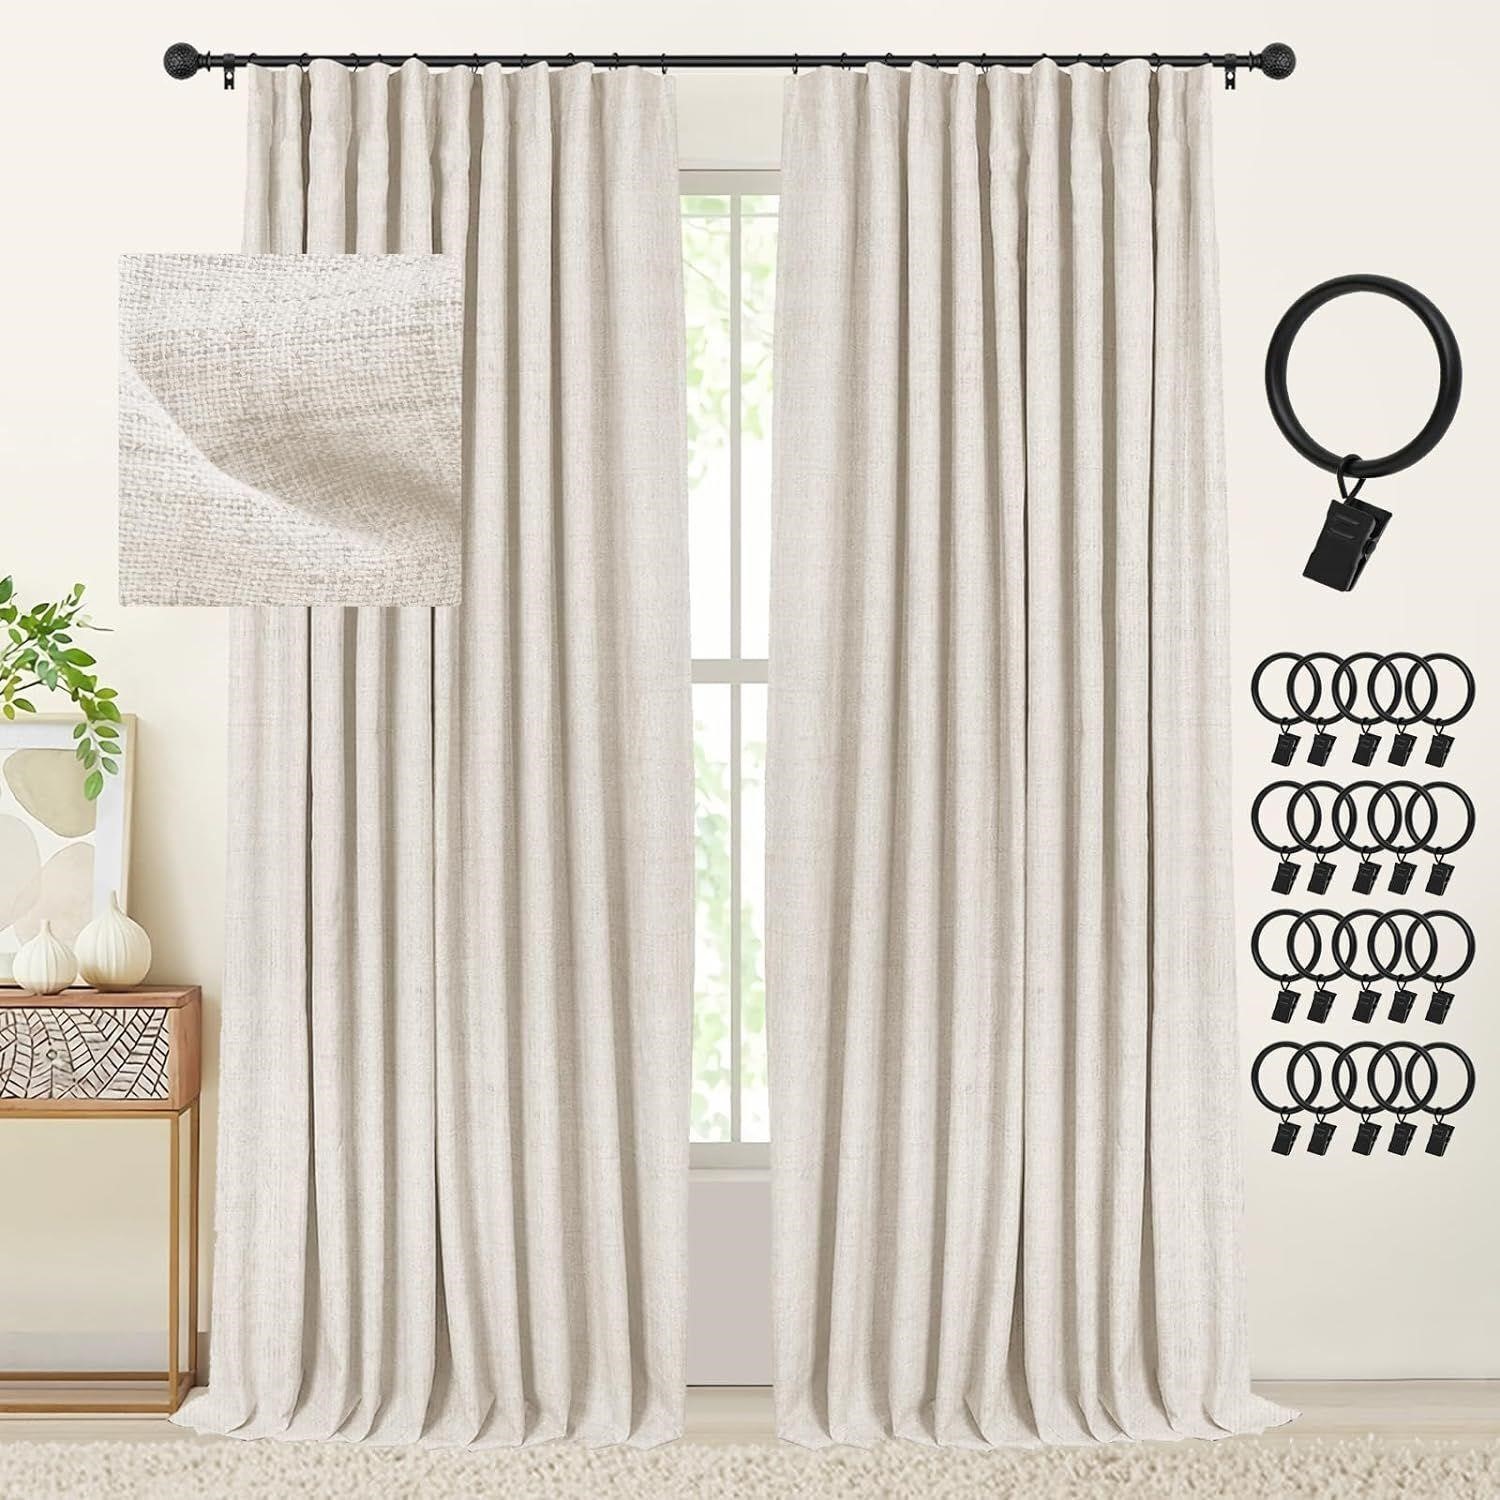 INOVADAY Cream Blackout Curtains 84 Inches Long